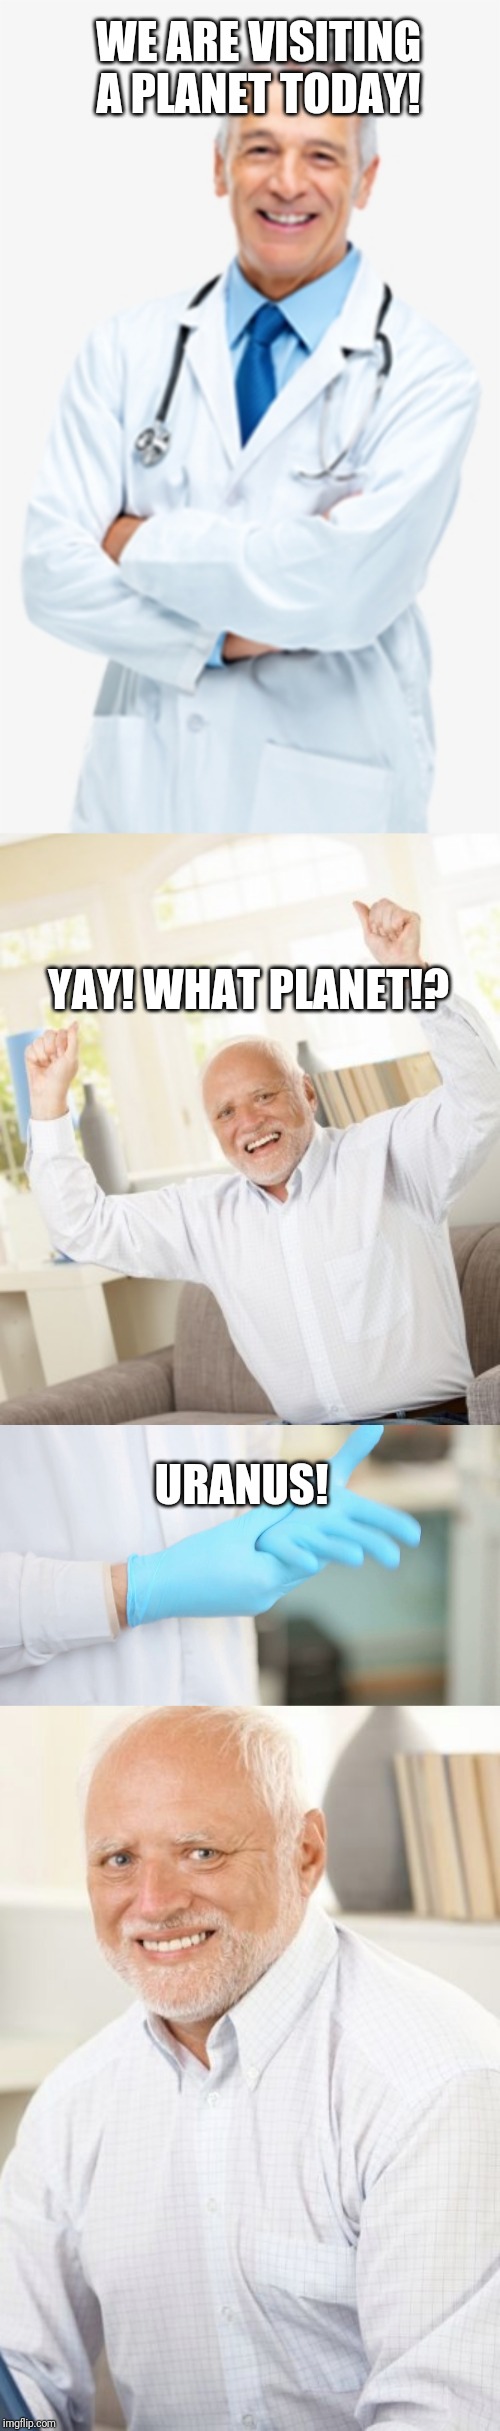 Dr check up | WE ARE VISITING A PLANET TODAY! YAY! WHAT PLANET!? URANUS! | image tagged in dr,uranus,meme,fun,planets,old guy | made w/ Imgflip meme maker